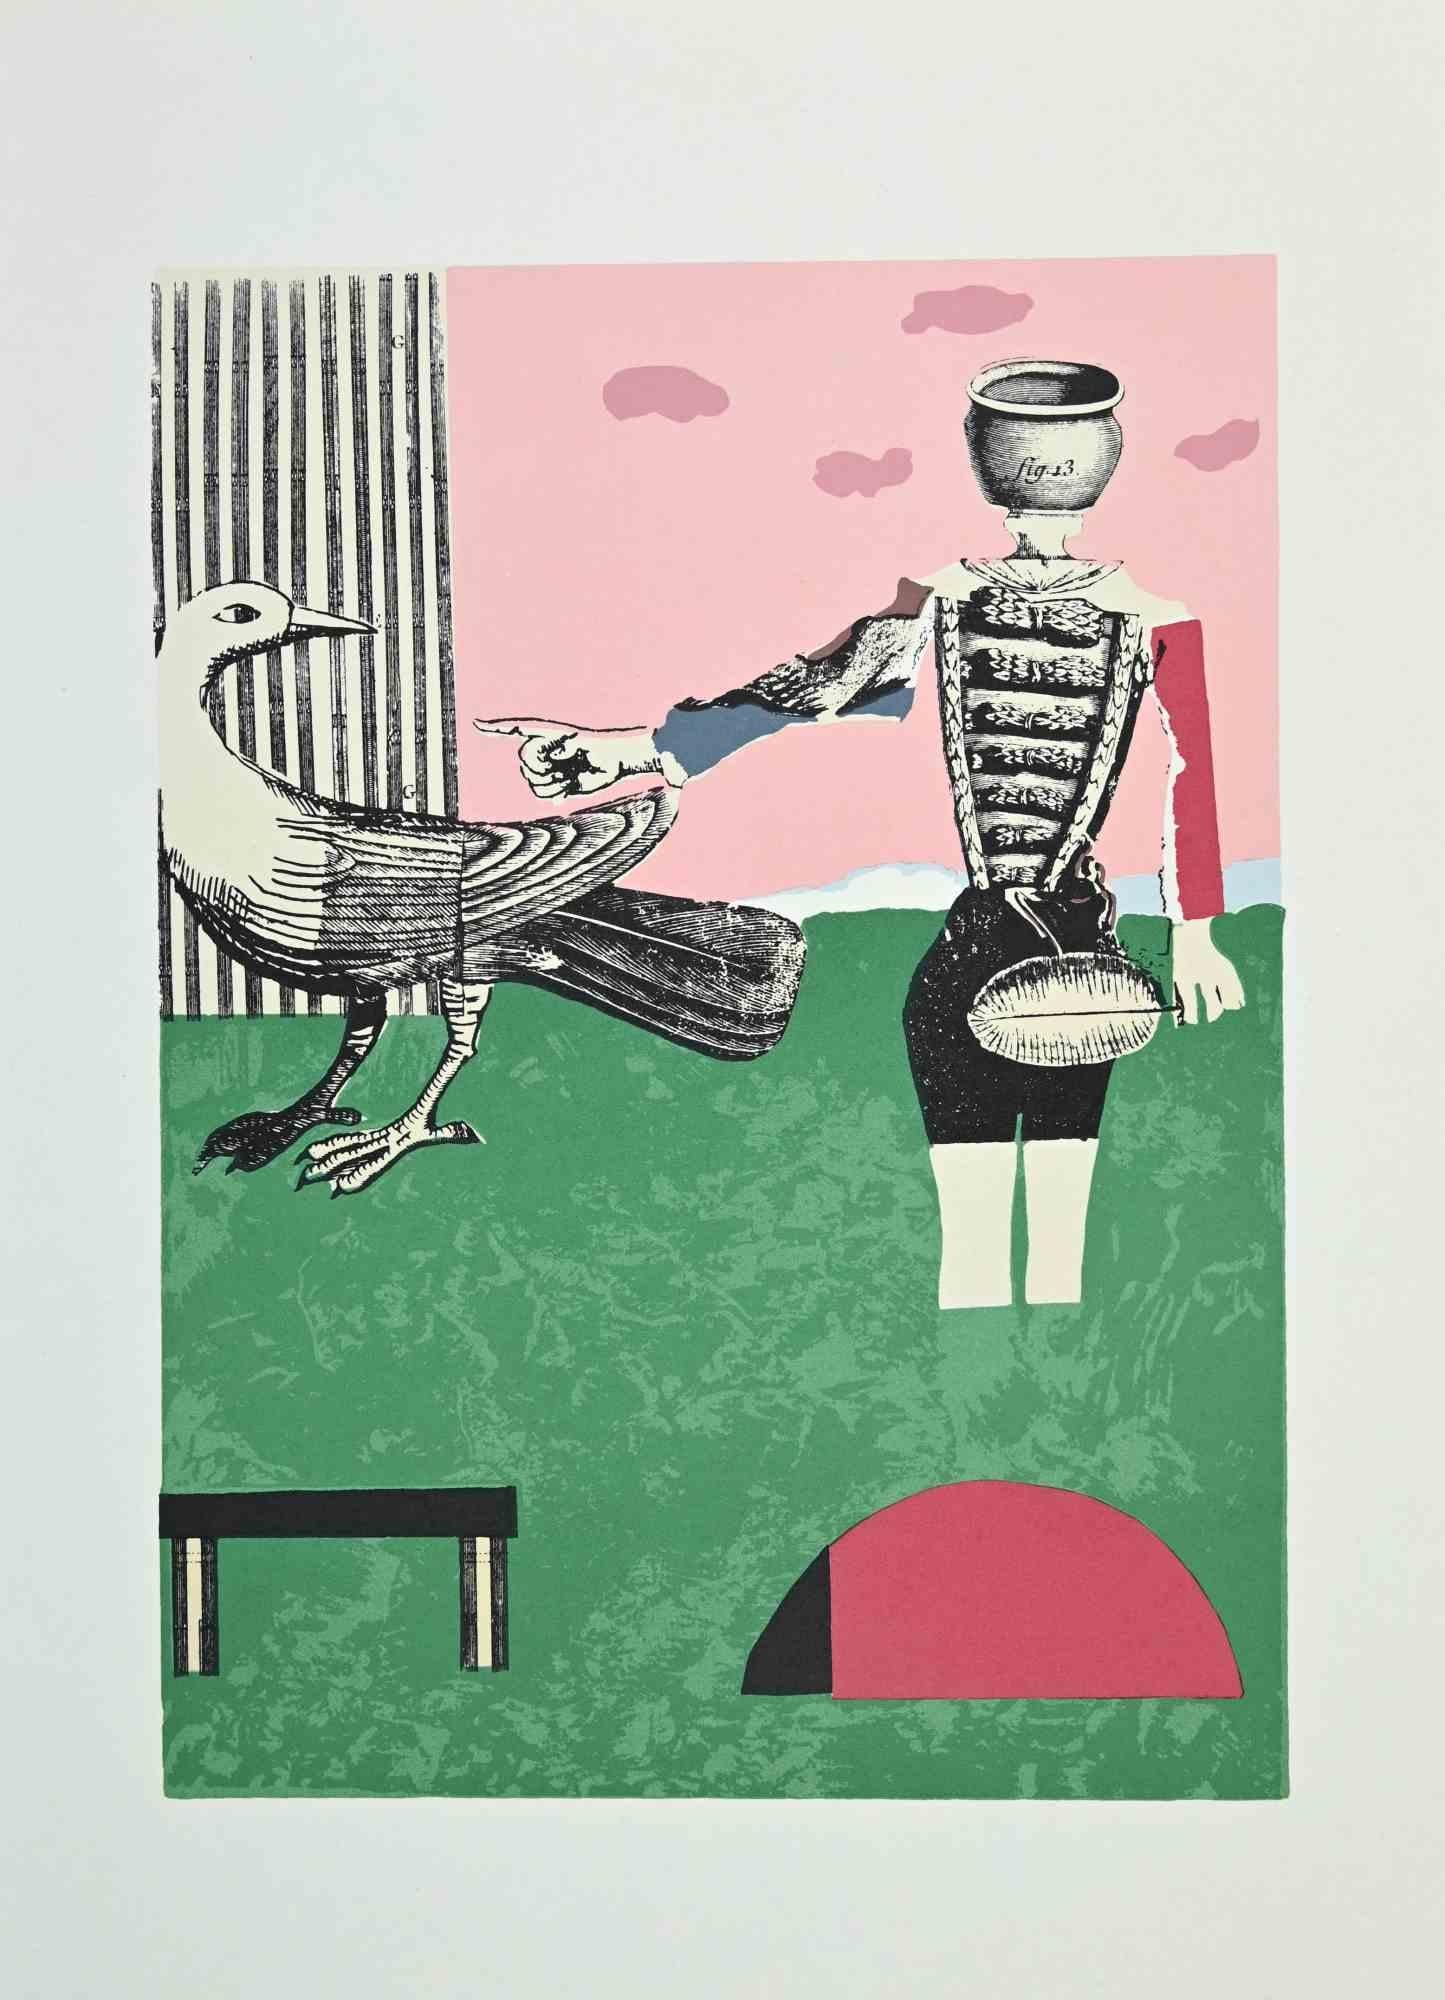 Figure is a Vintage Offset Print on ivory-colored paper, realized by Franco Gentilini (Italian Painter, 1909-1981) in the 1970s.

The state of preservation of the artwork is excellent.

Franco Gentilini ( Italian Painter, 1909-1981): Gentilini's